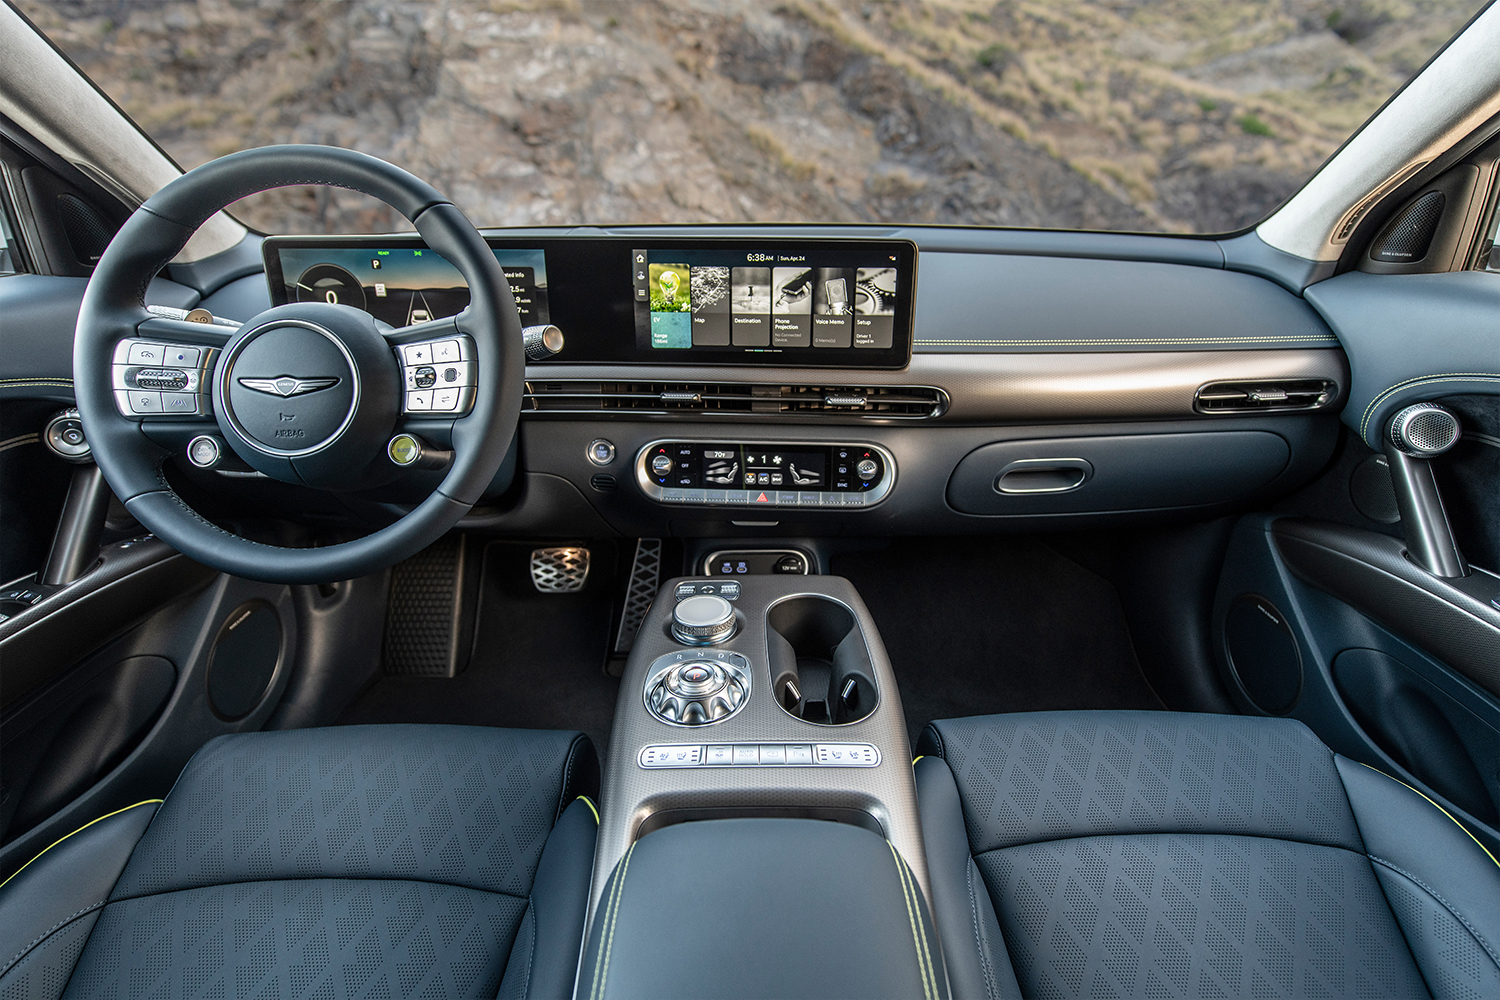 The interior of the Genesis GV60, an electric SUV, featuring a green Boost button on the steering wheel